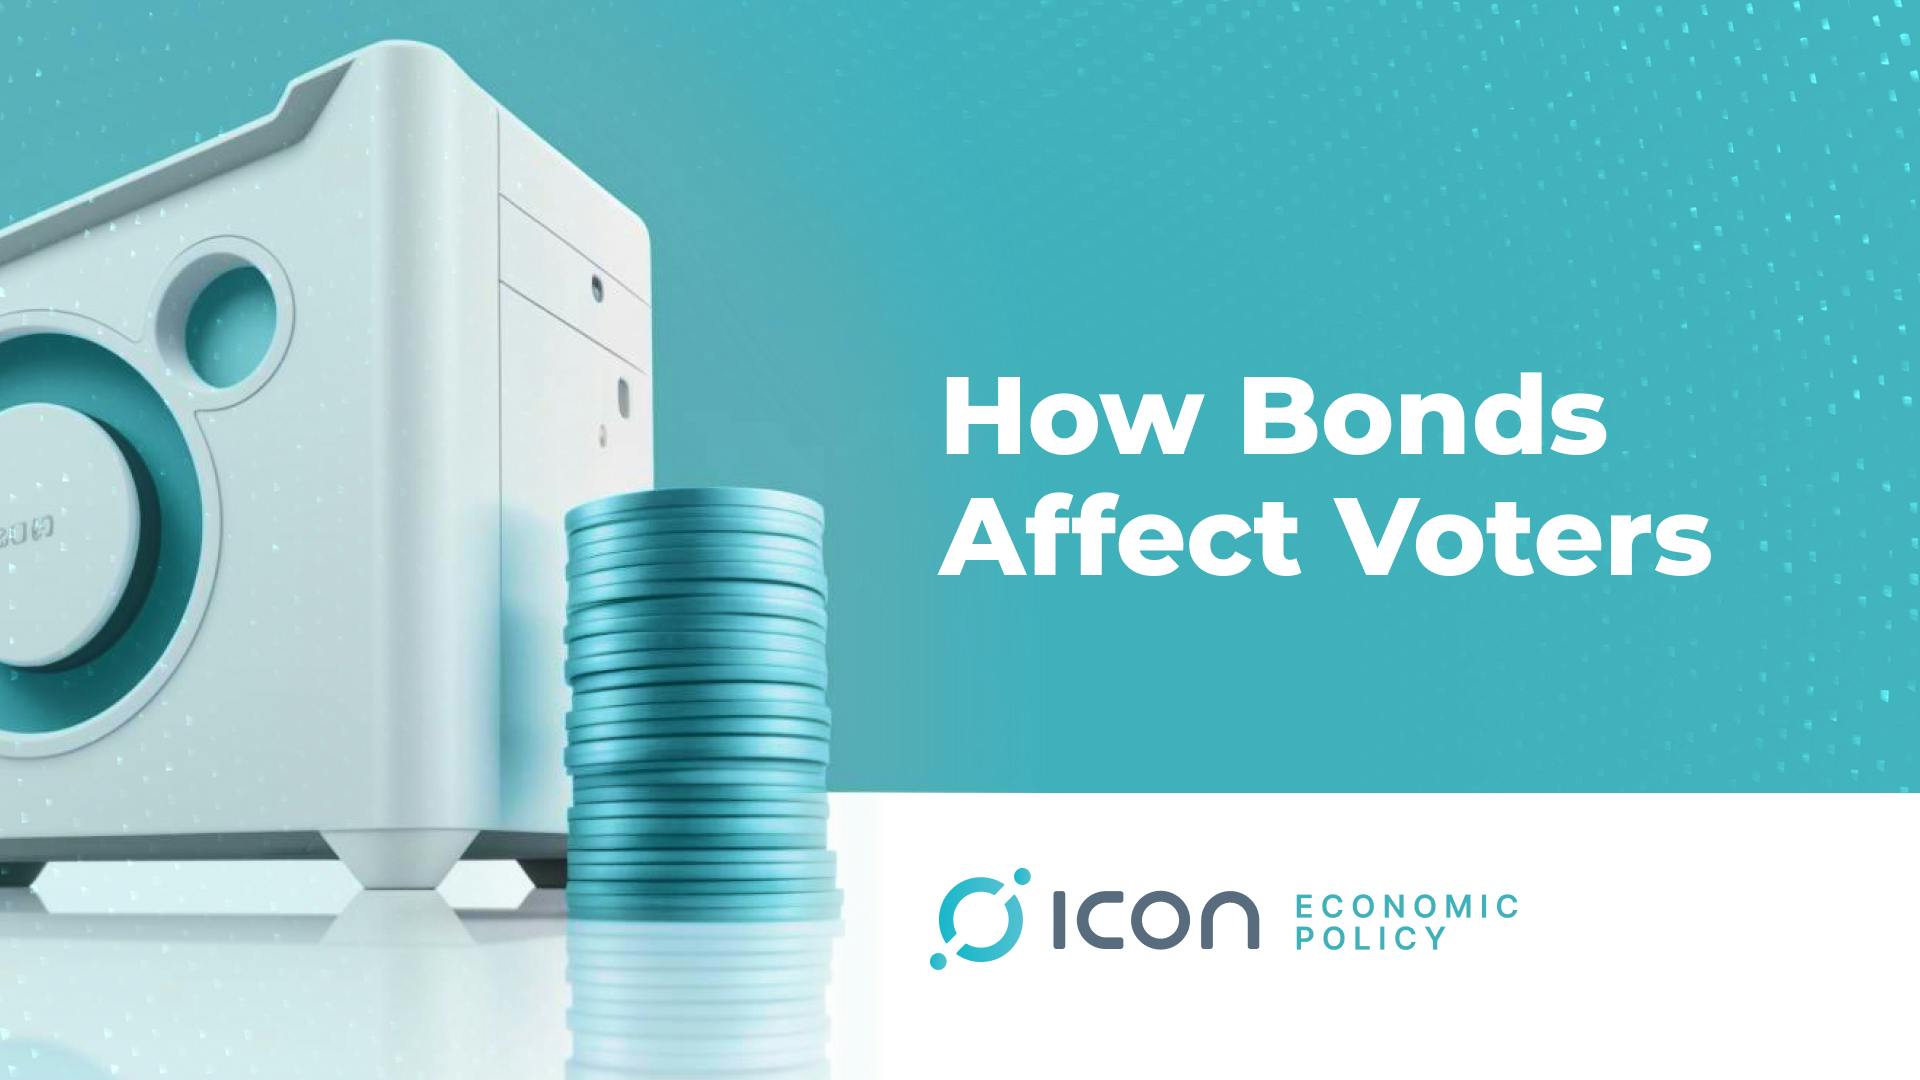 With the passing of Revision 25, validator bonding of at least 5% of ICX votes are required for consensus, affecting rewards distribution. With minimal bonds diluting rewards, voters are urged to consider validator bonds for optimal staking rewards.